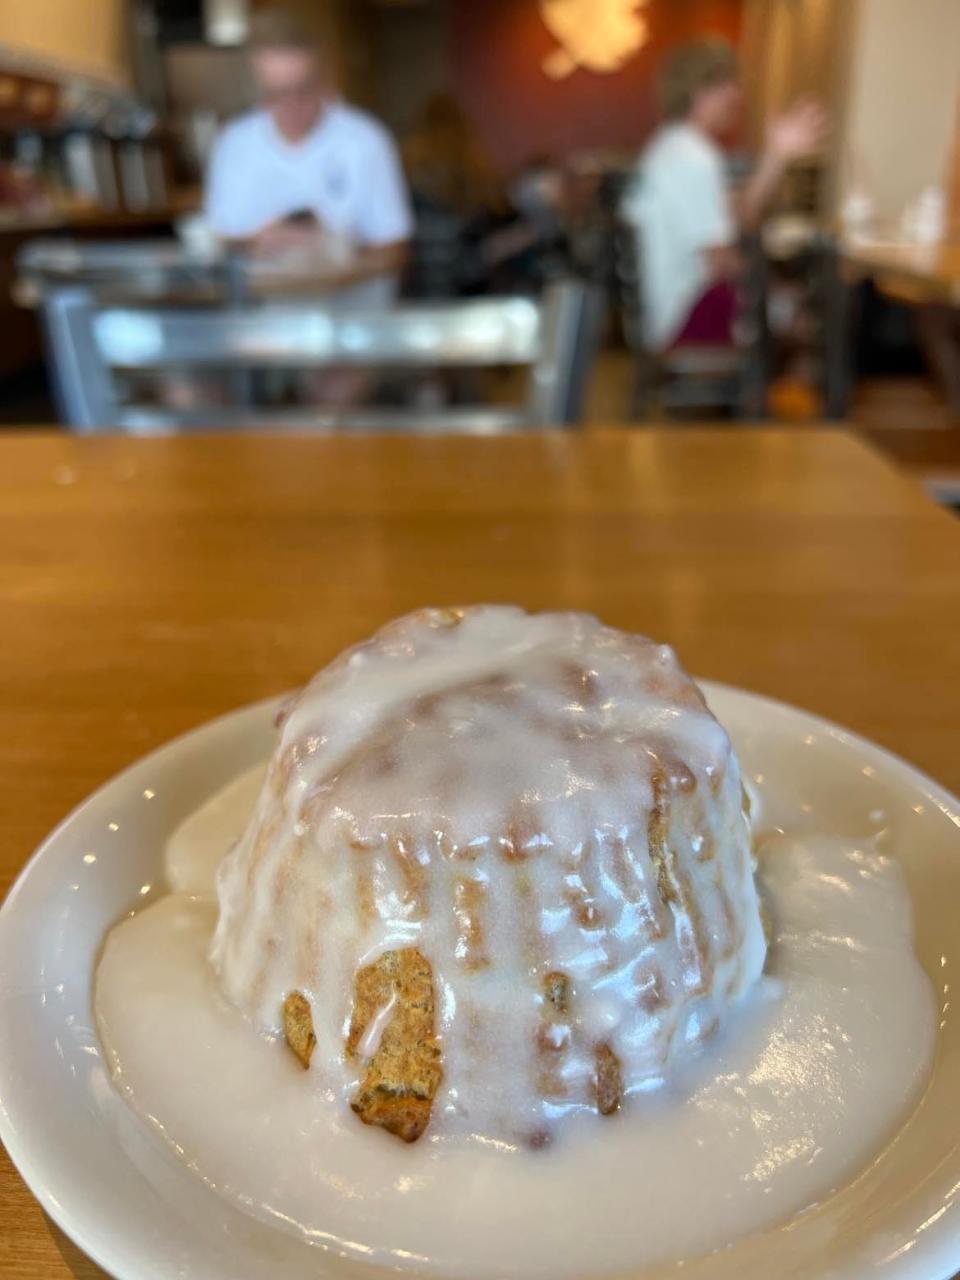 Homemade biscuits are a specialty of the Maple Street Biscuit Company in Jackson Township, including ones with icing and cinnamon chips. The new restaurant is part of a national chain.